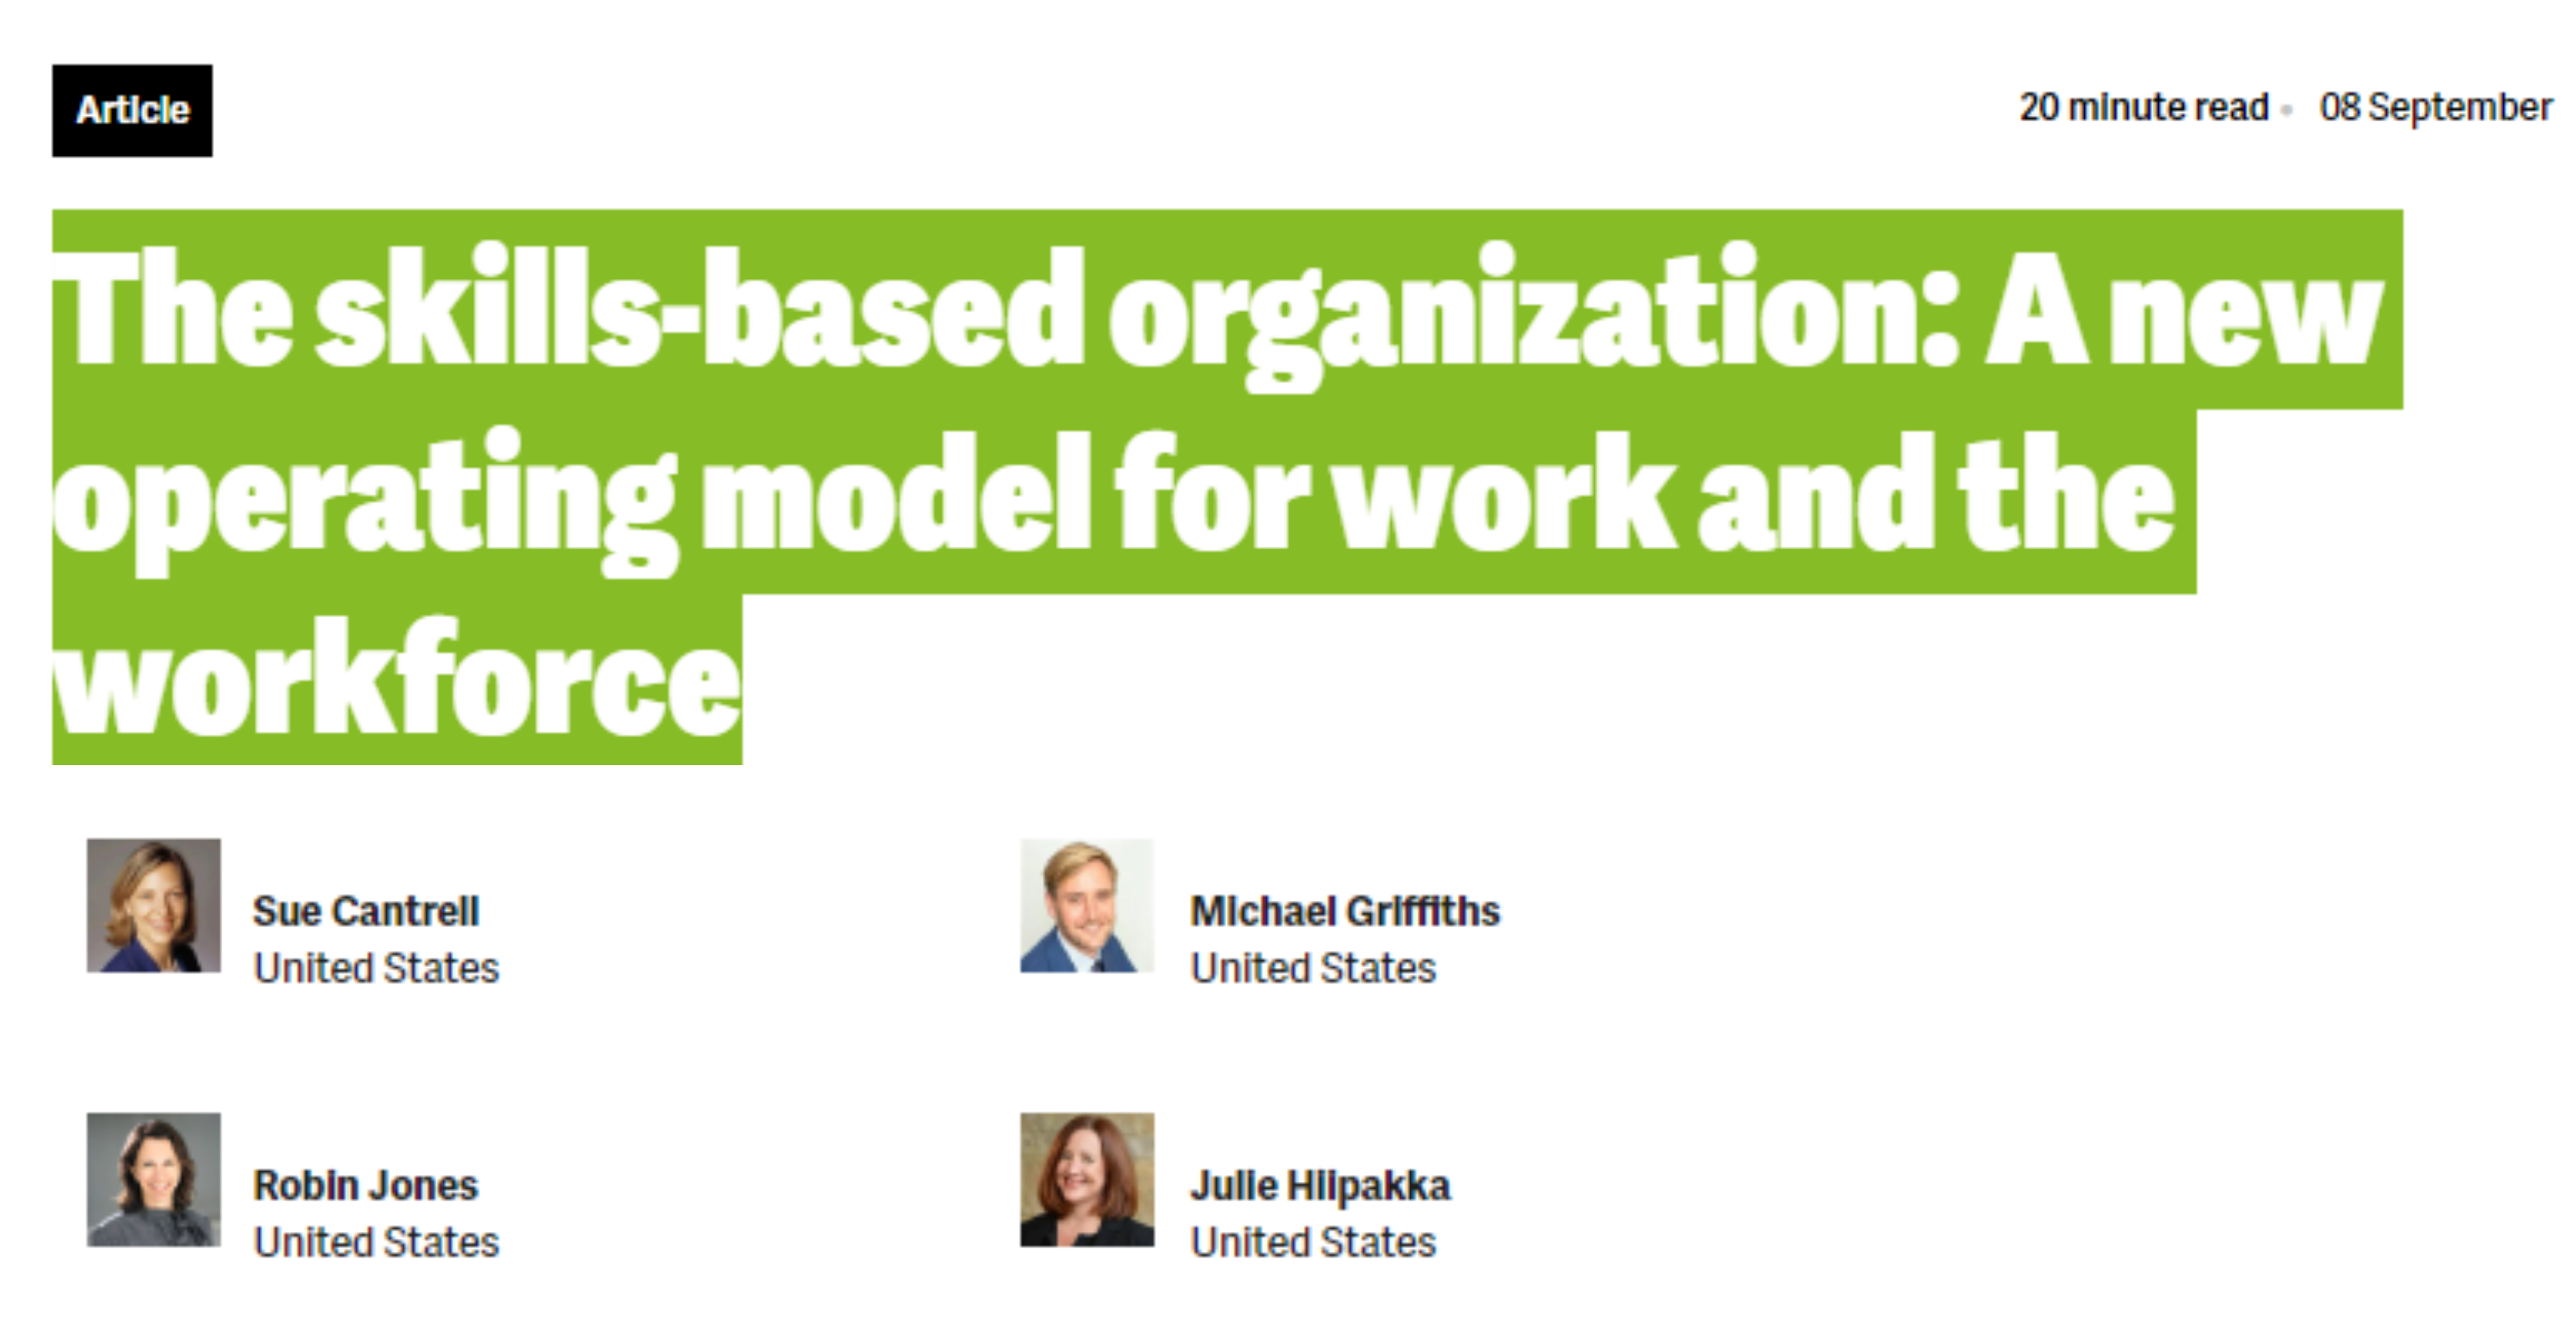 Artykuł „The skills-based organization: A new operating model for work and the workforce” Deloitte